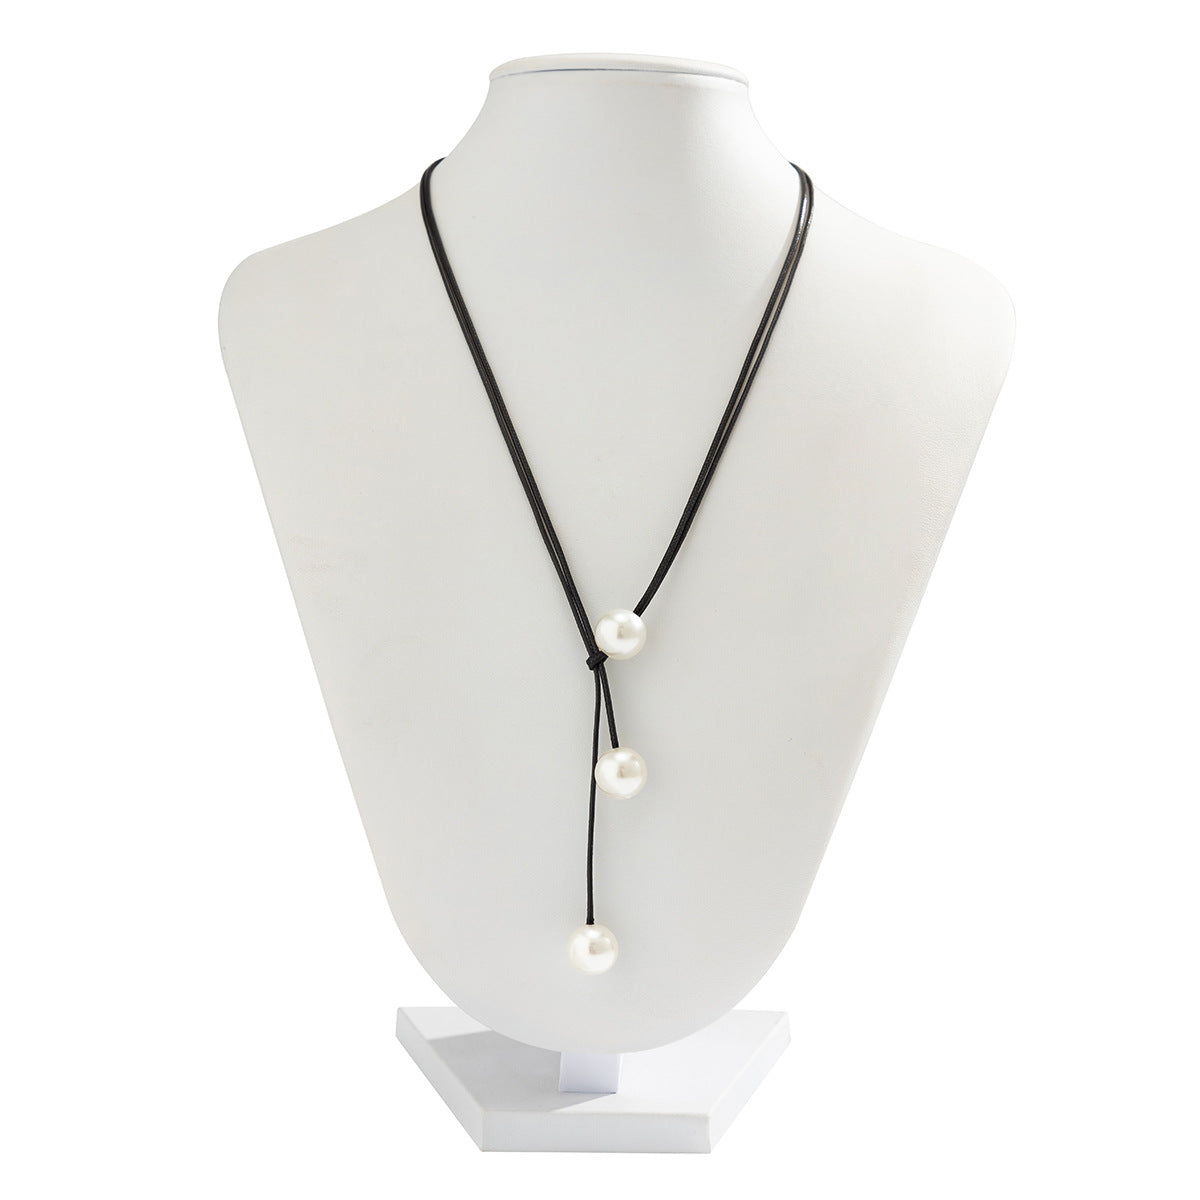 Gorgeous Leather & Pearl Necklace - Perfect Valentine's Day Gift Under $50!